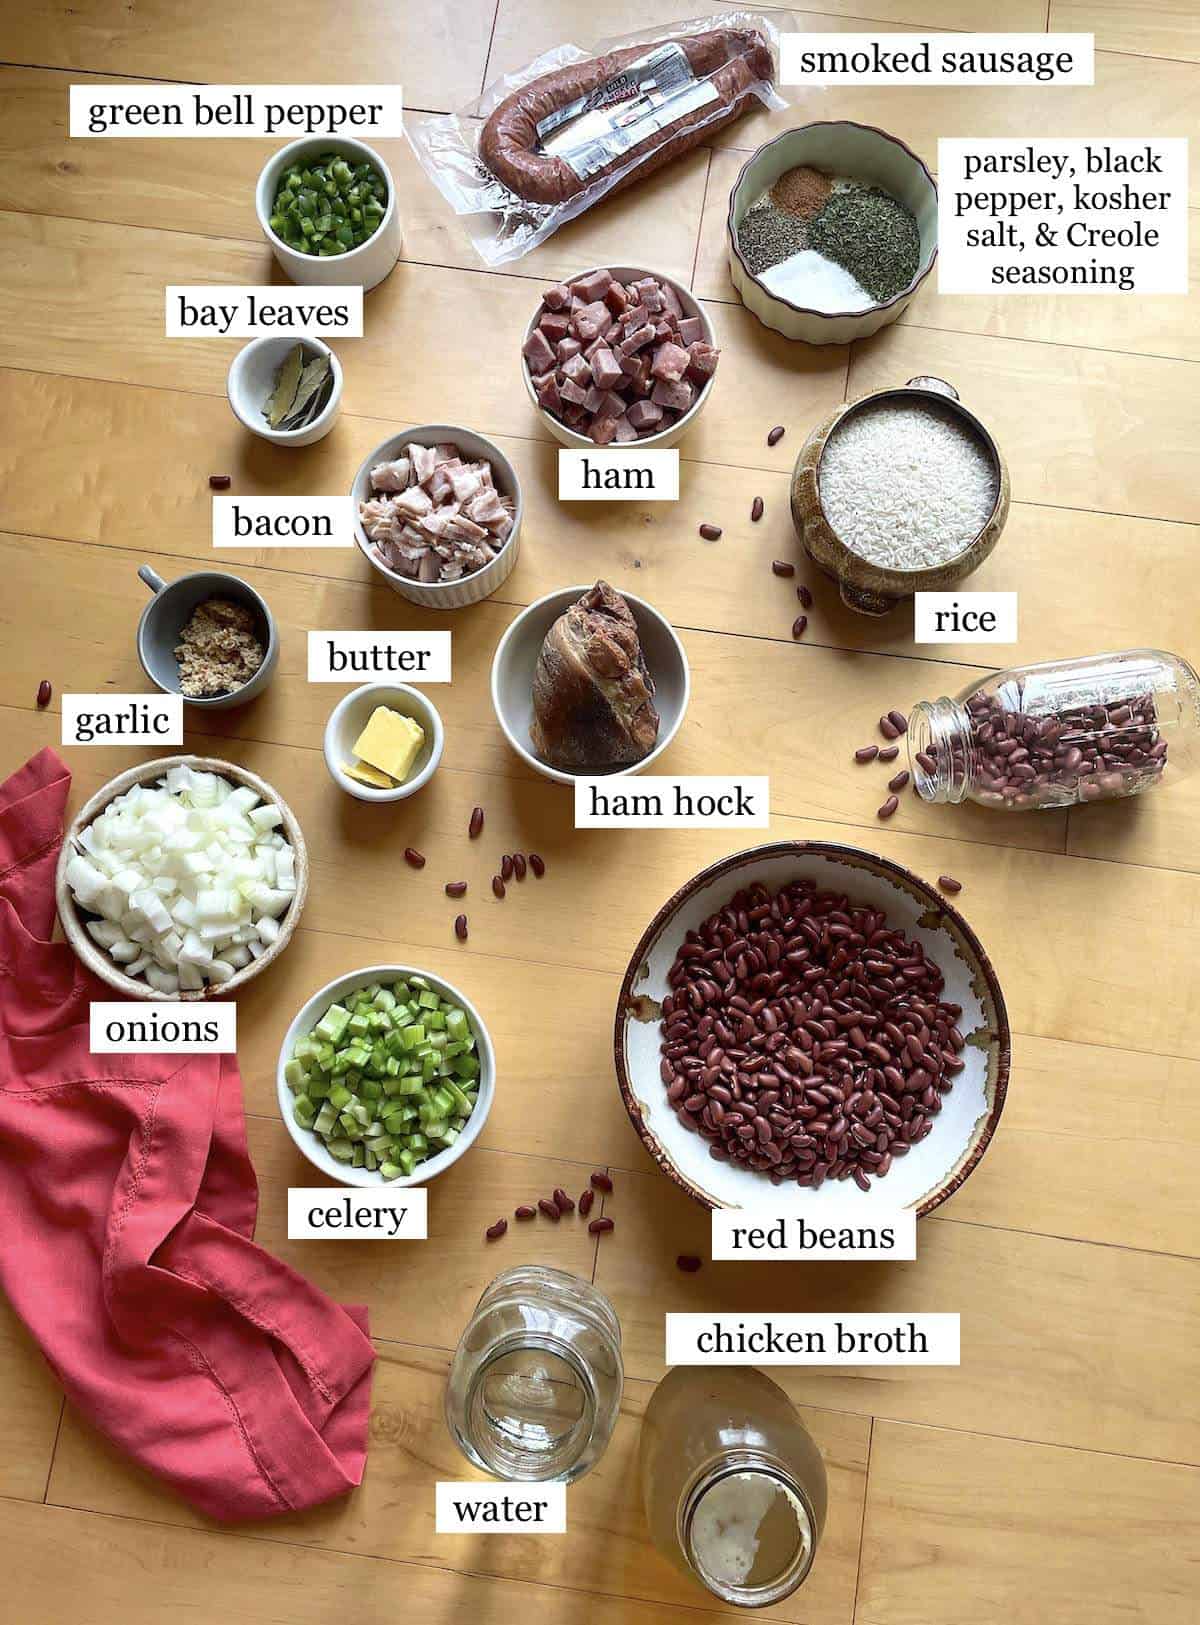 The ingredients needed to make red beans and rice, laid out in small bowls and labeled.